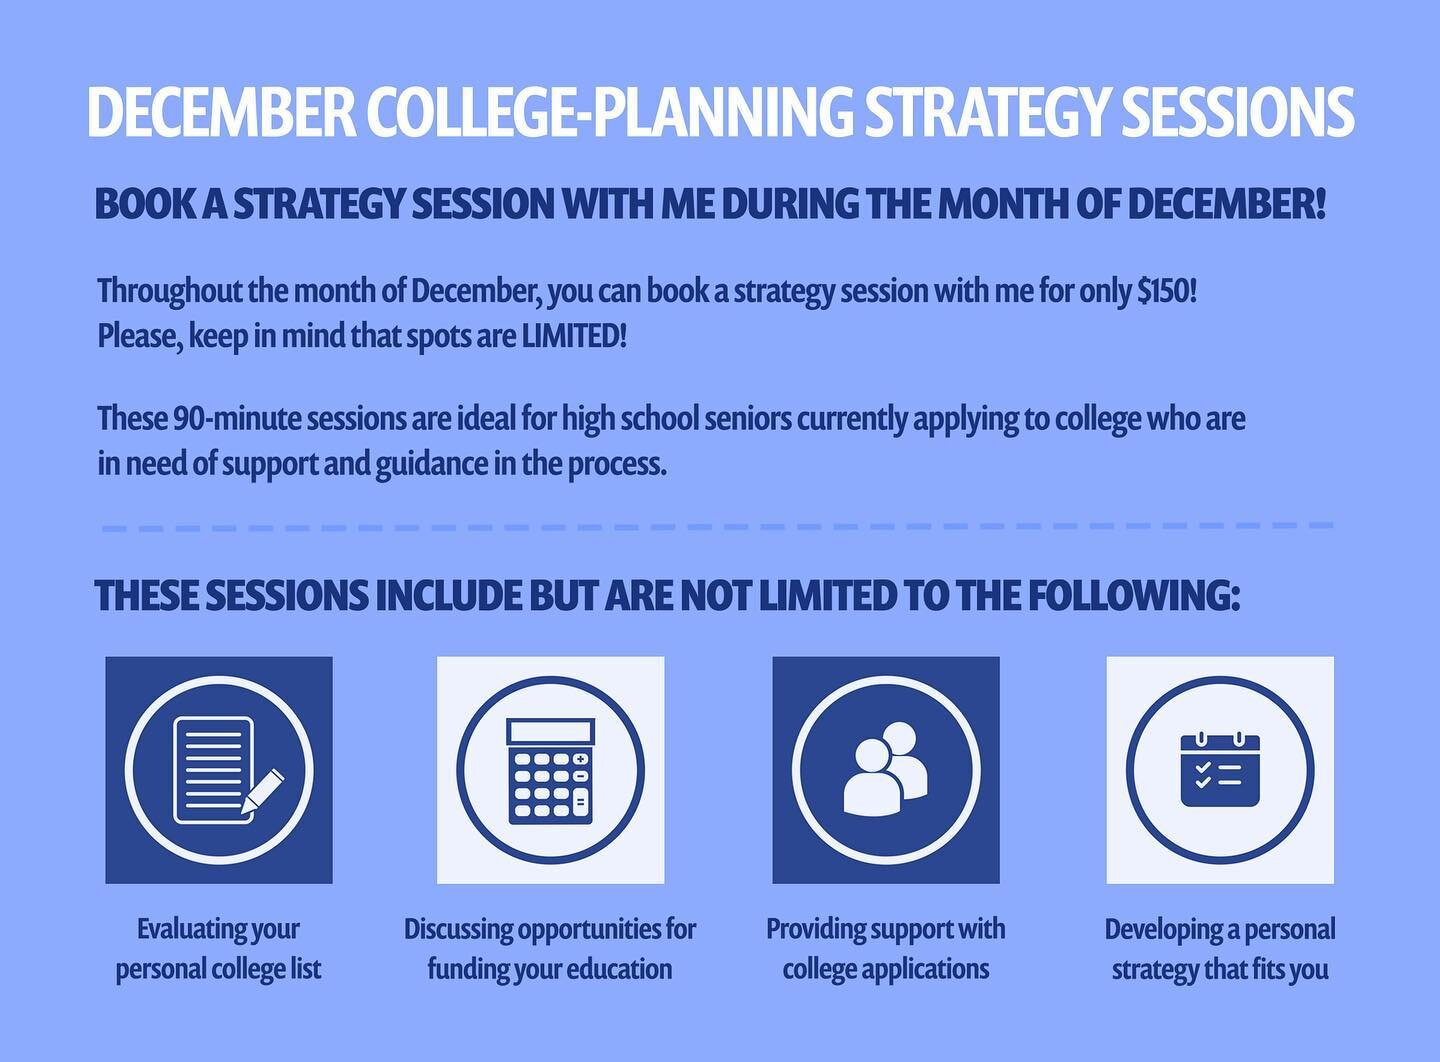 Parents of High School Seniors! If you&rsquo;re student is applying to college and you feel overwhelmed book a strategy session with me today!

To book your session DM me or email info@candacehutson.com